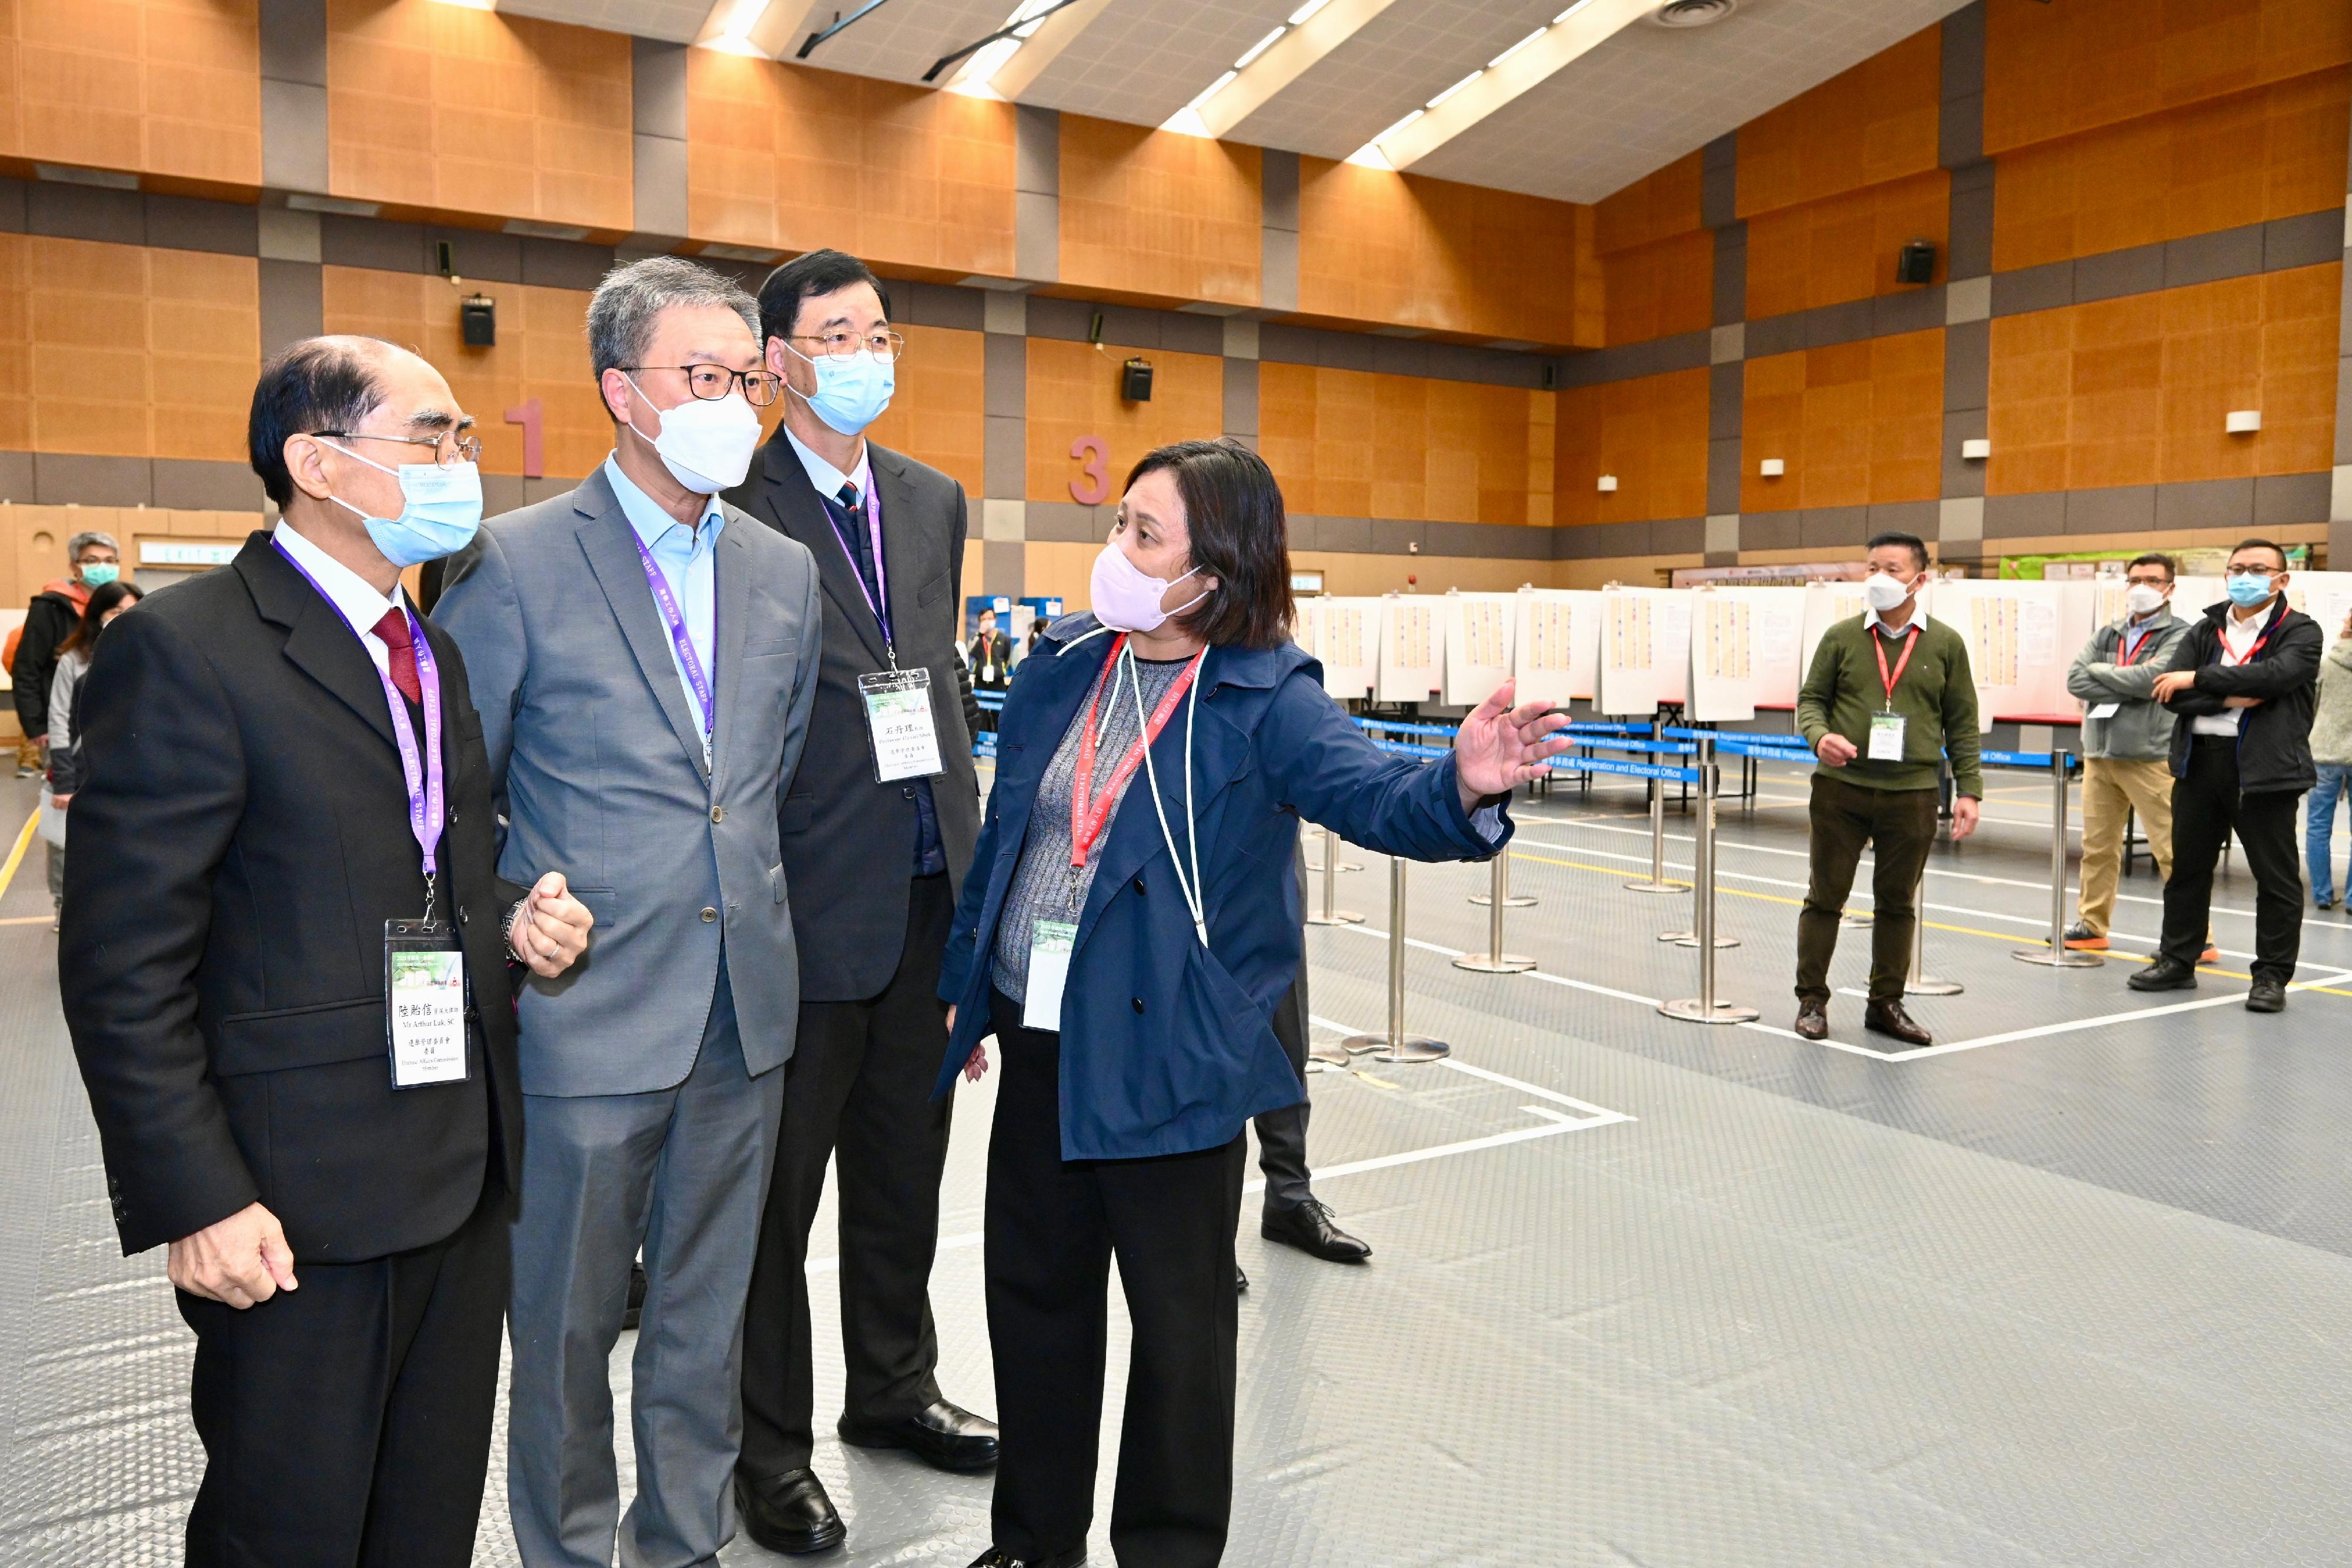 The Chairman of the Electoral Affairs Commission (EAC), Mr Justice David Lok (second left), EAC members Mr Arthur Luk, SC (first left), and Professor Daniel Shek (third left) today (January 15) visited the polling station of the Kaifong Representative Election in the 2023 Rural Ordinary Election at Cheung Chau Sports Centre and were briefed by the polling staff on the operation of the polling station.